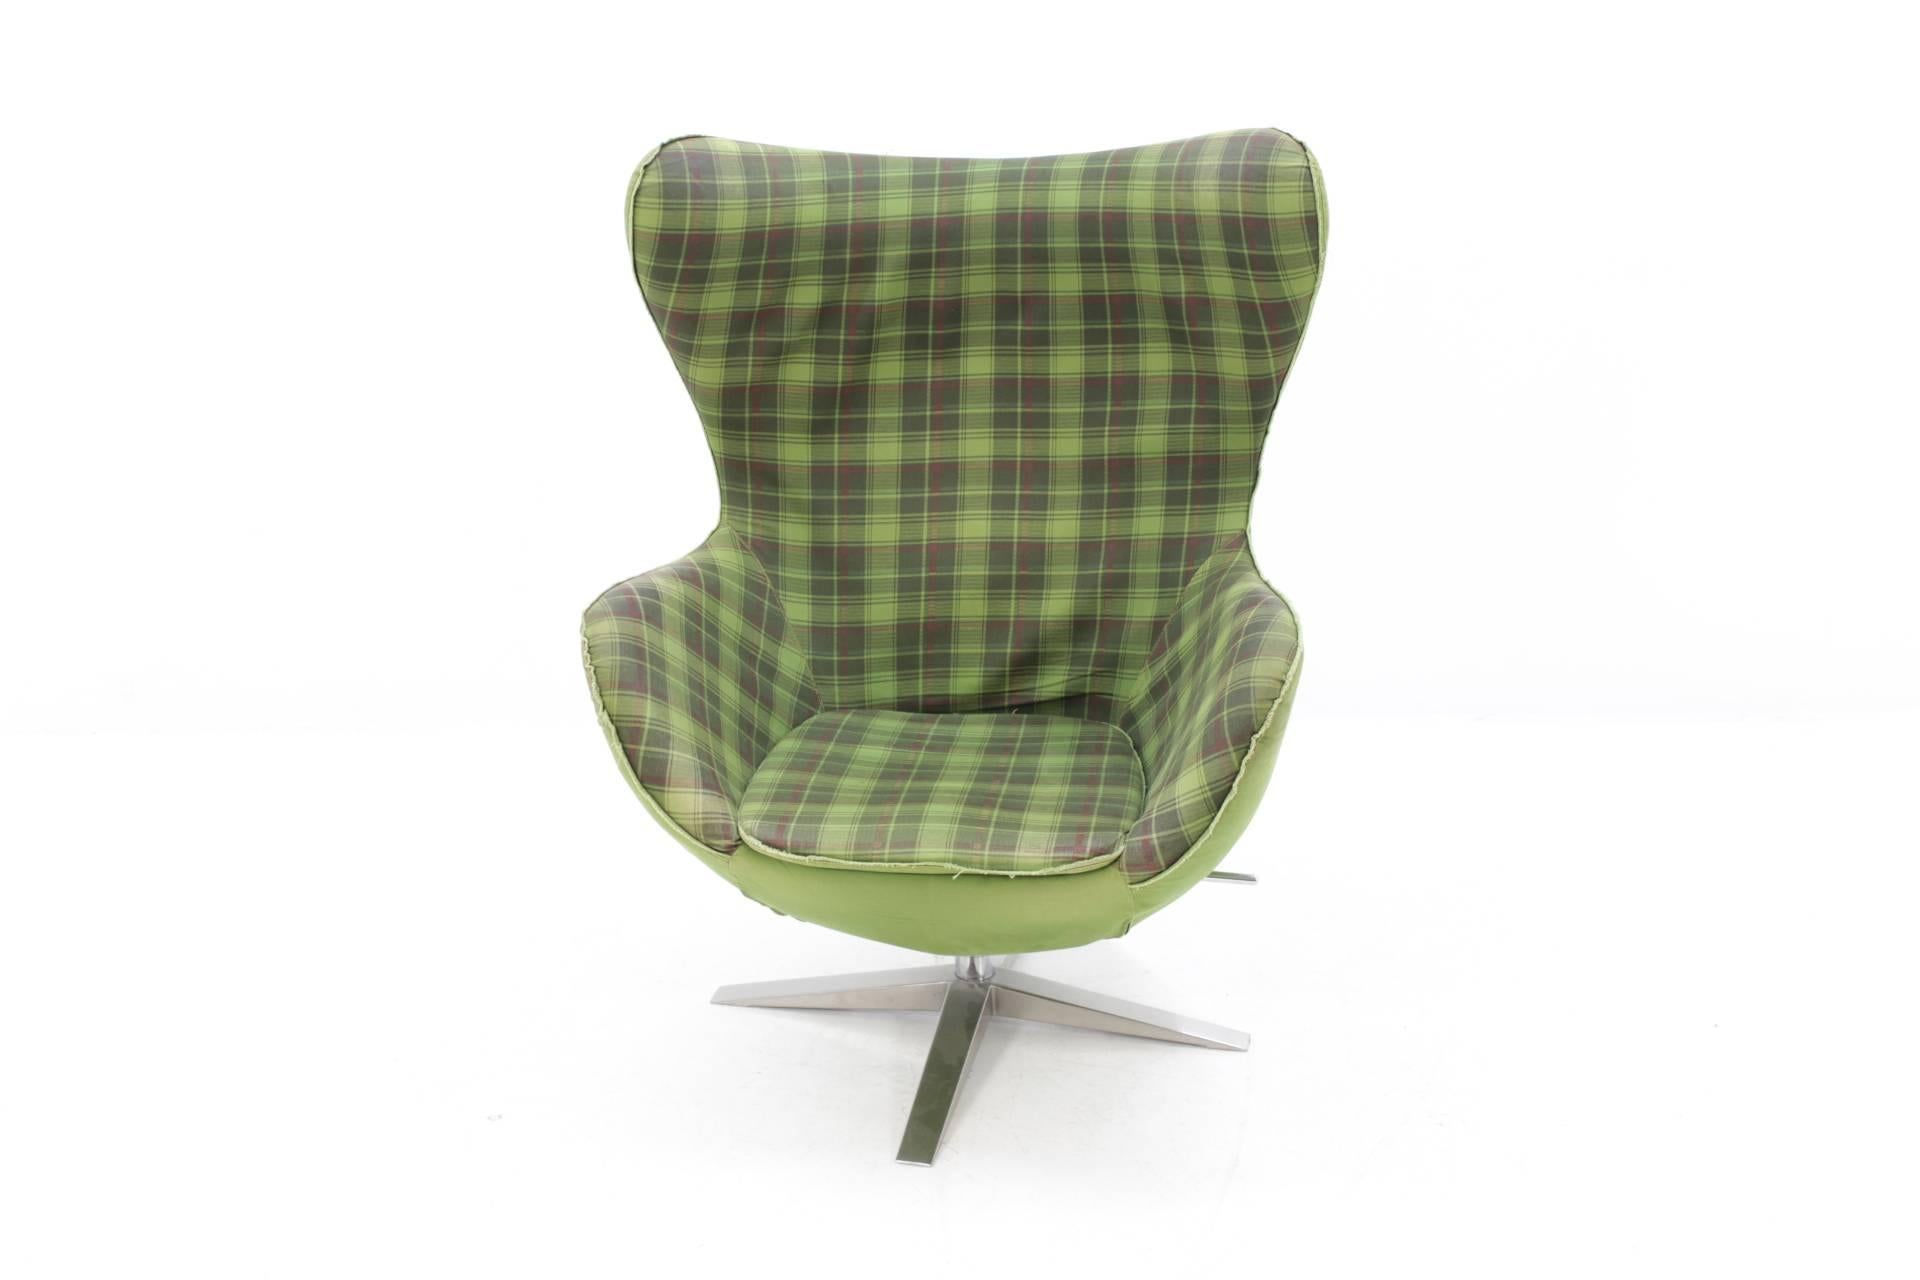 - 1990s
- original upholstery
- in style of egg chair.